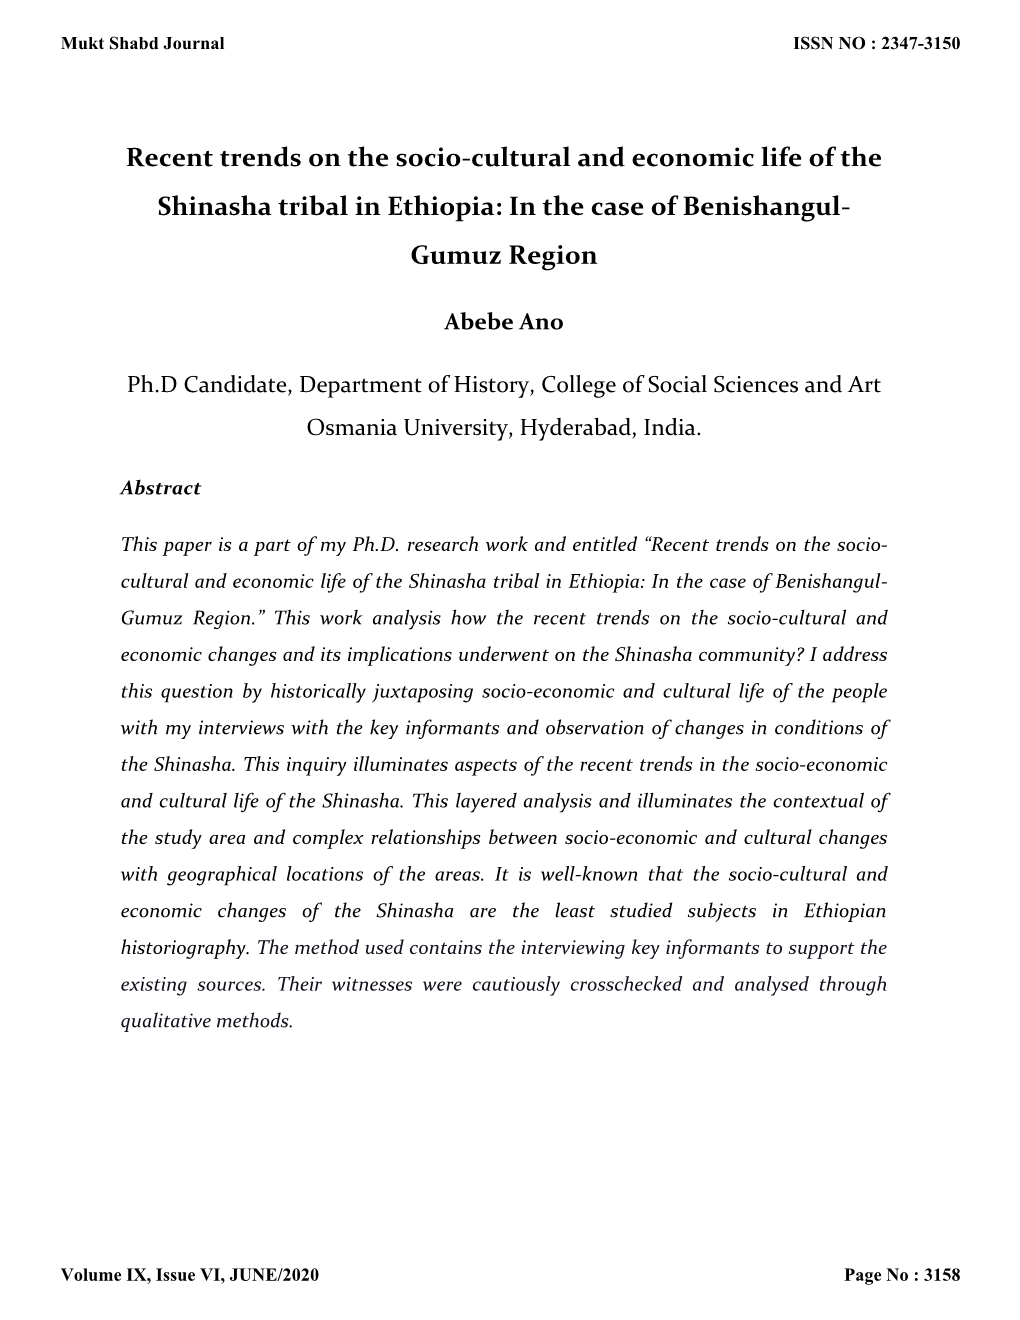 Recent Trends on the Socio-Cultural and Economic Life of the Shinasha Tribal in Ethiopia: in the Case of Benishangul